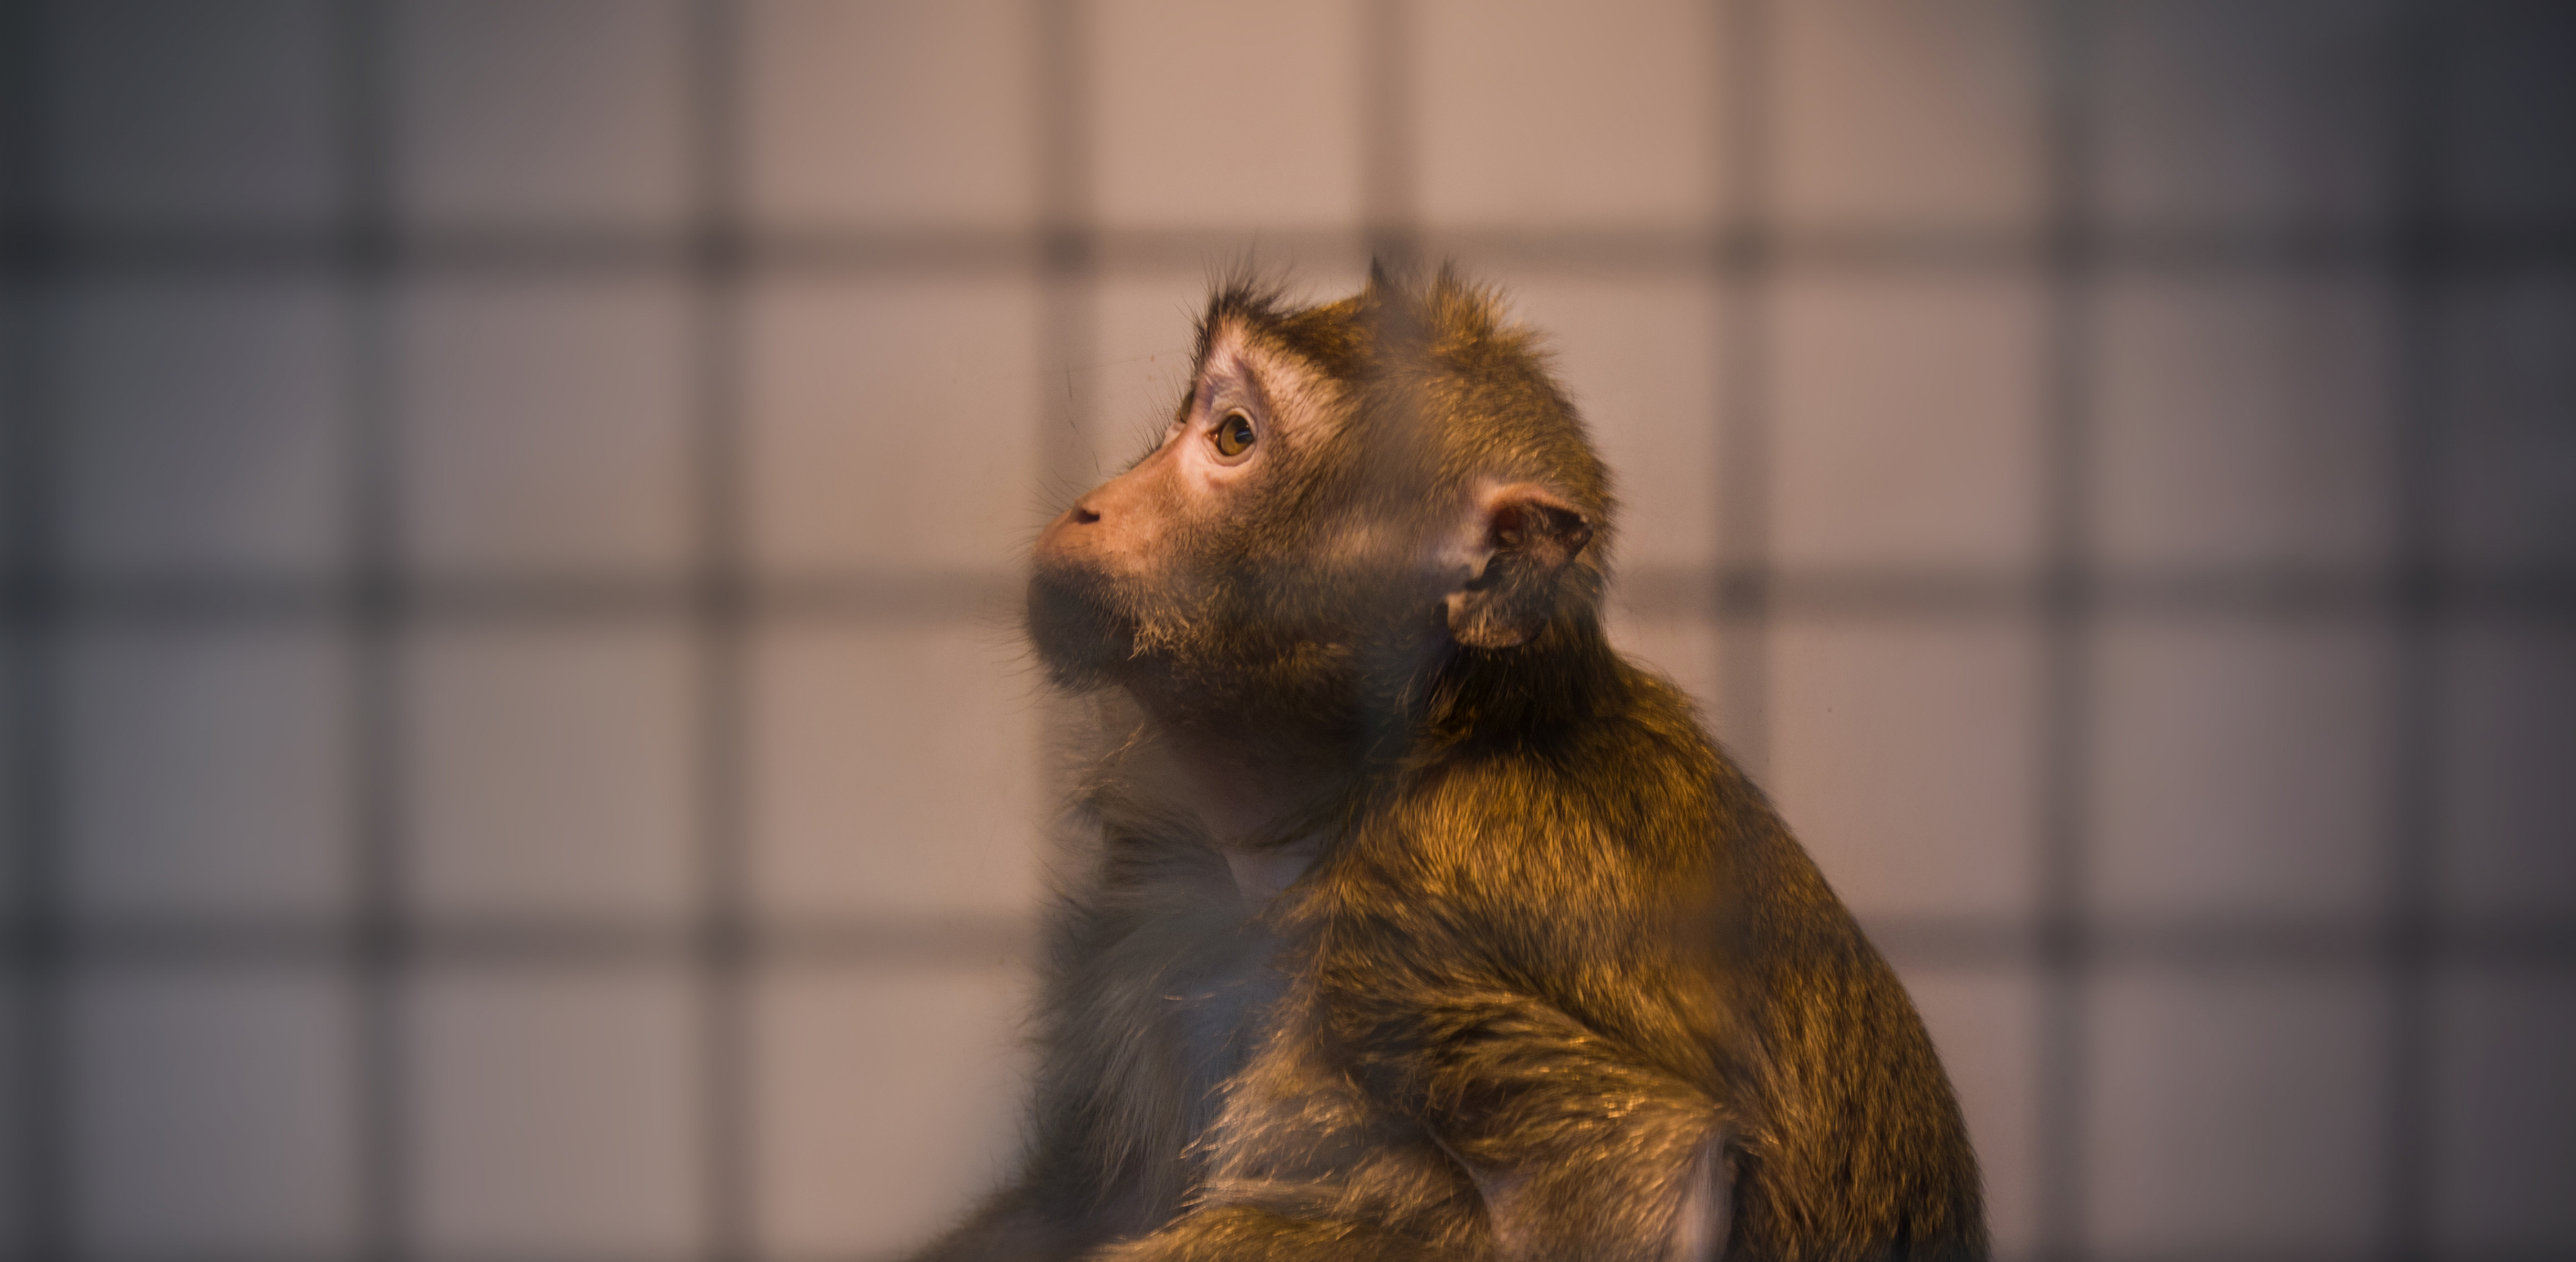 A macaque sits under artificial lighting behind a wired cage walls